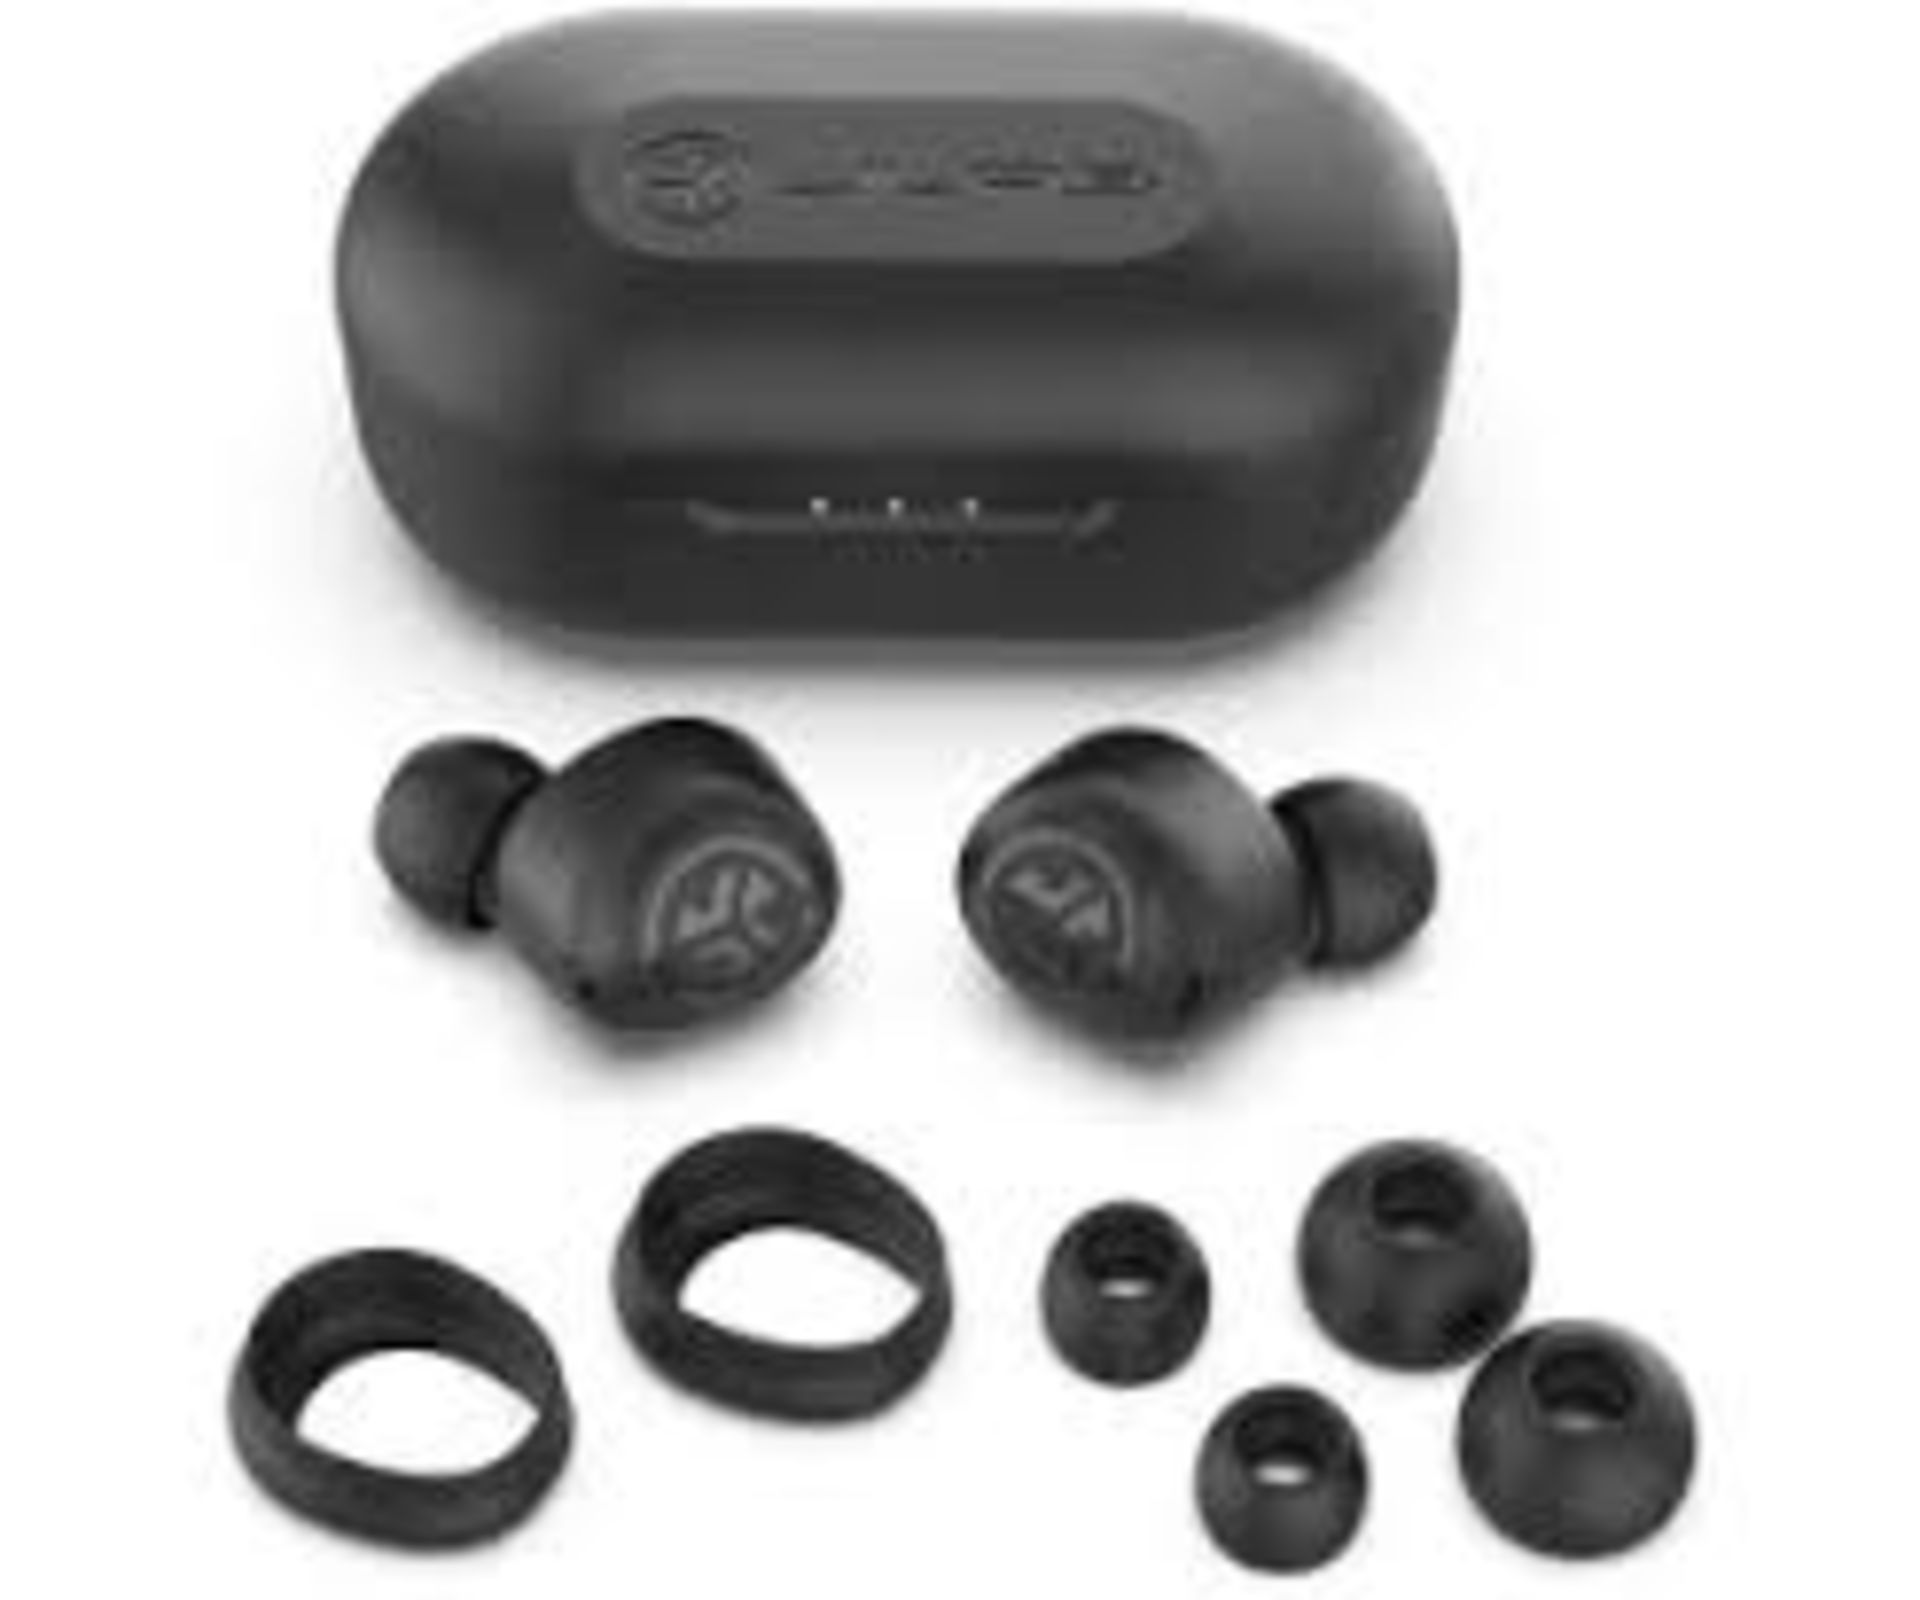 Jlab Audio Jbuds Air And Tw Wireless Bluetooth Noise-Cancelling Earphones - Black - Image 2 of 3